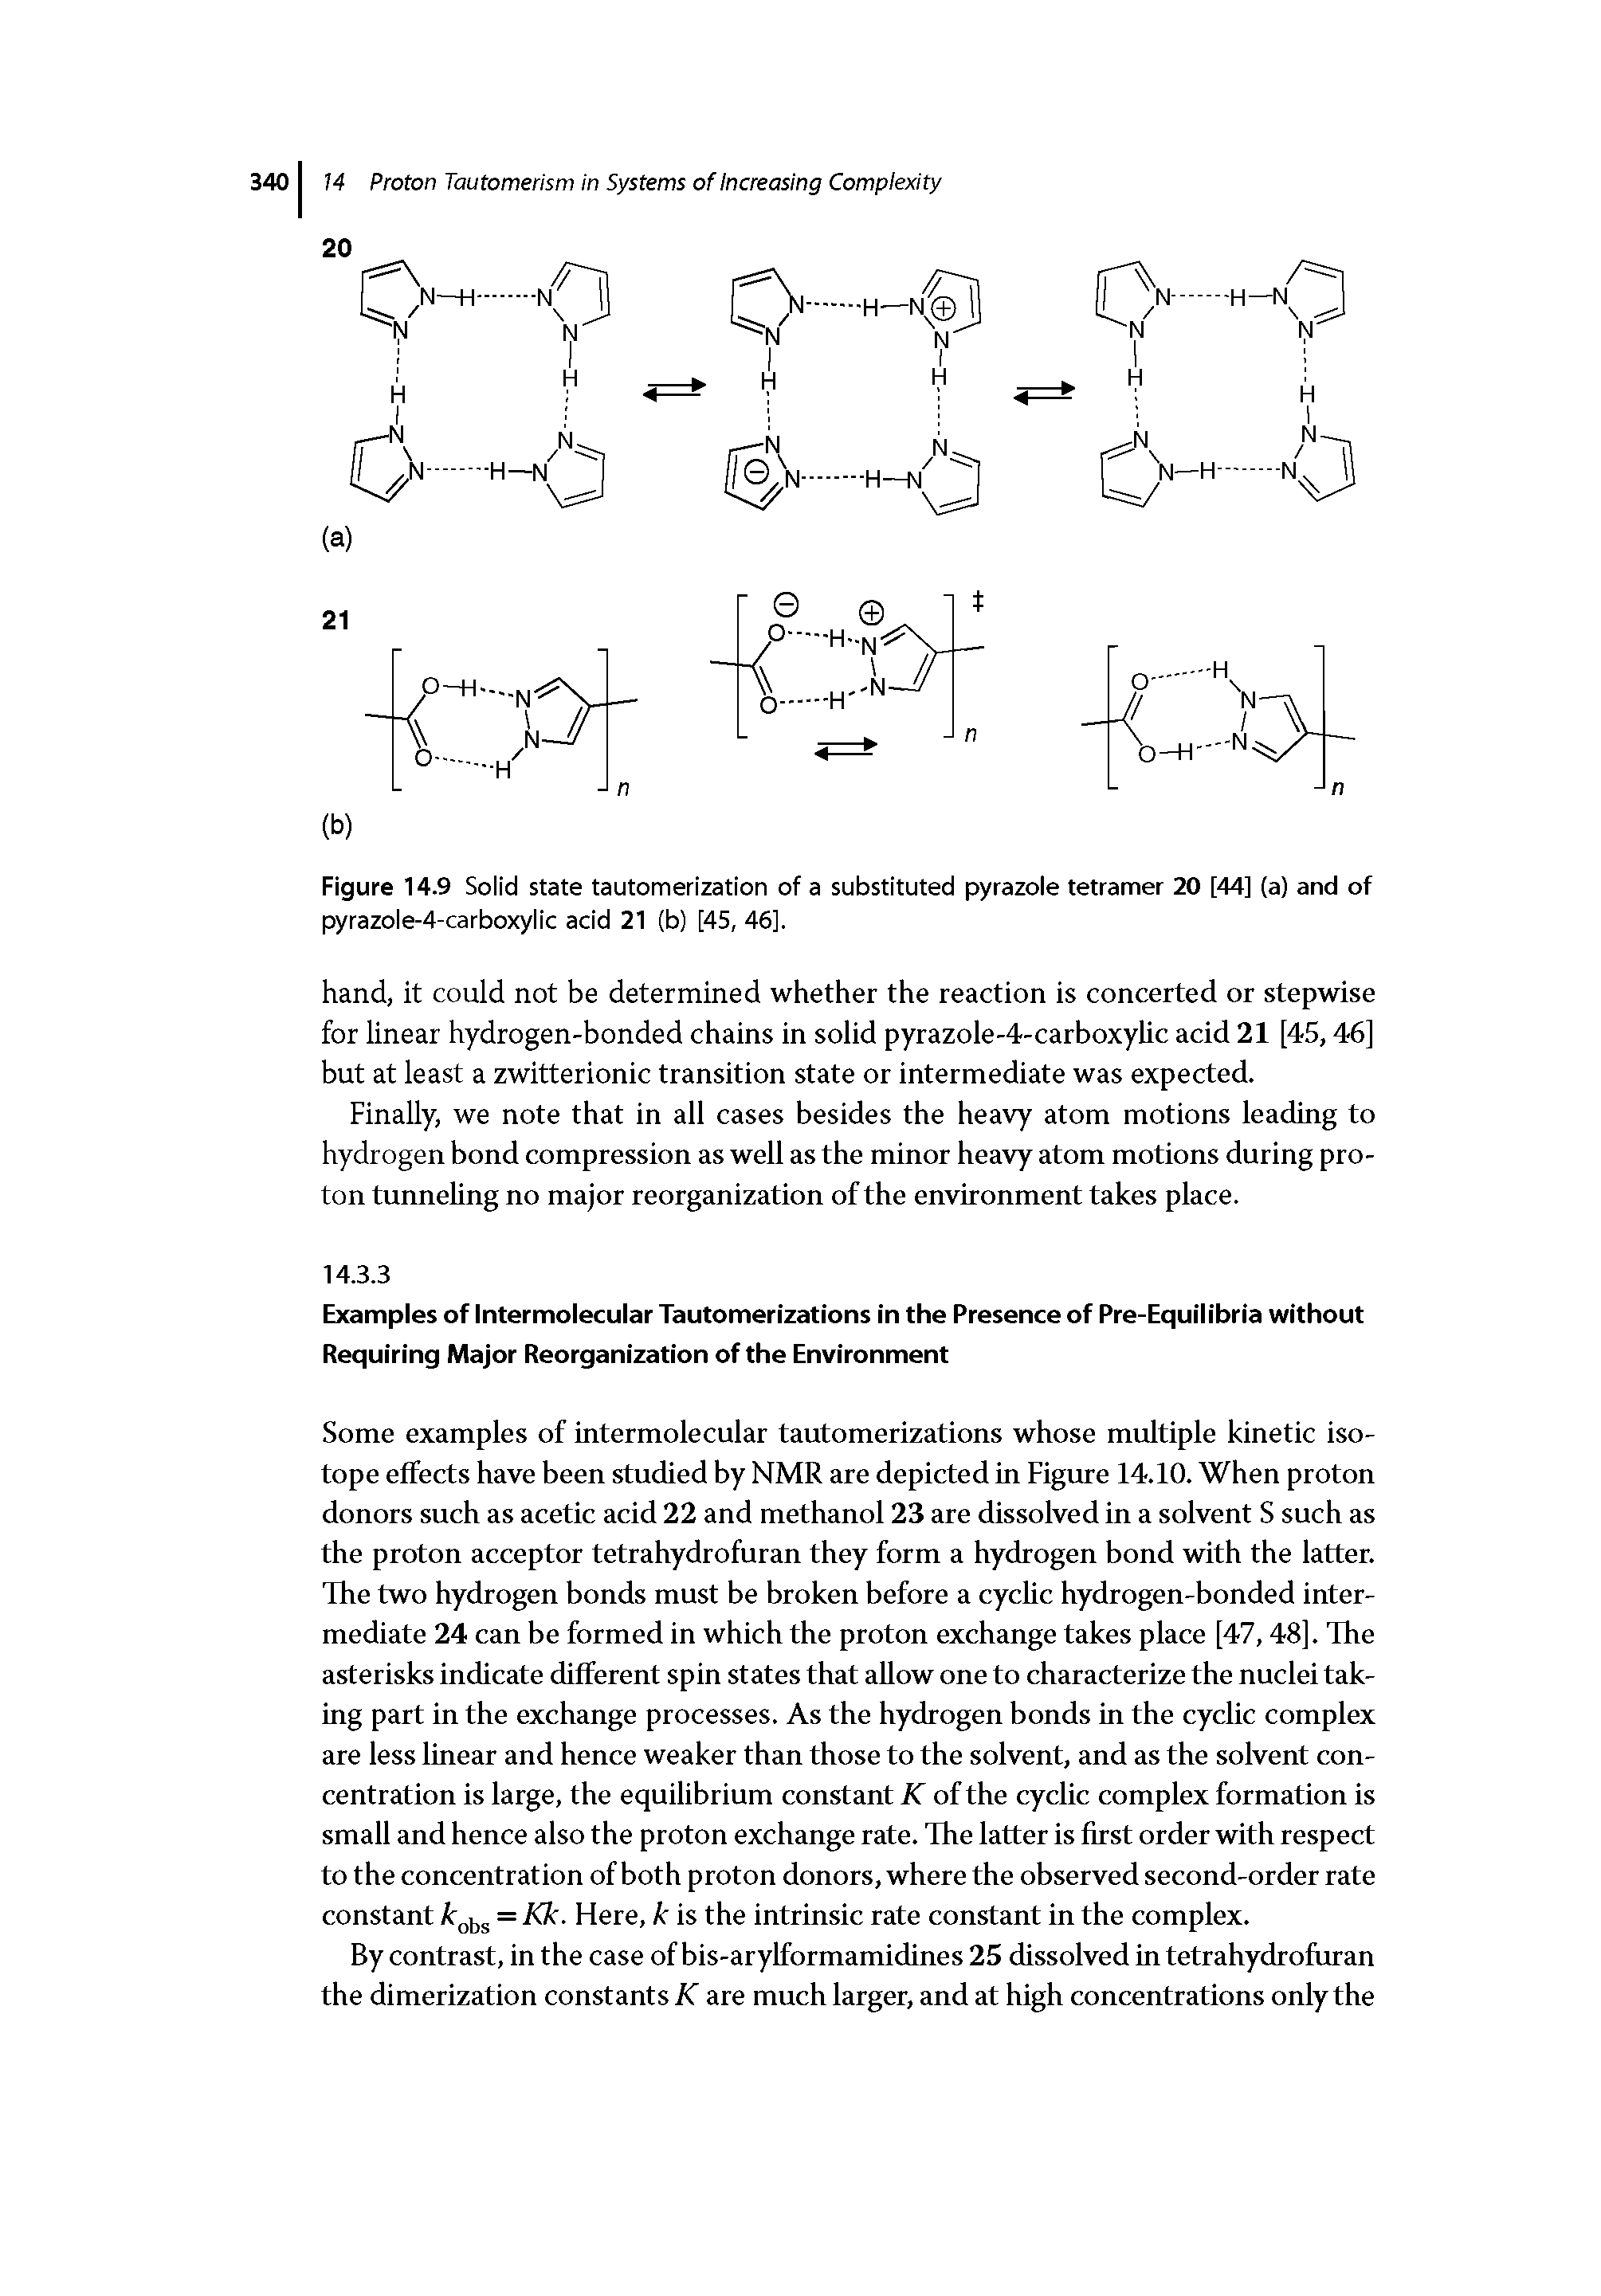 Figure 14.9 Solid state tautomerization of a substituted pyrazole tetramer 20 [44] (a) and of pyrazole-4-carboxylic acid 21 (b) [45, 46].